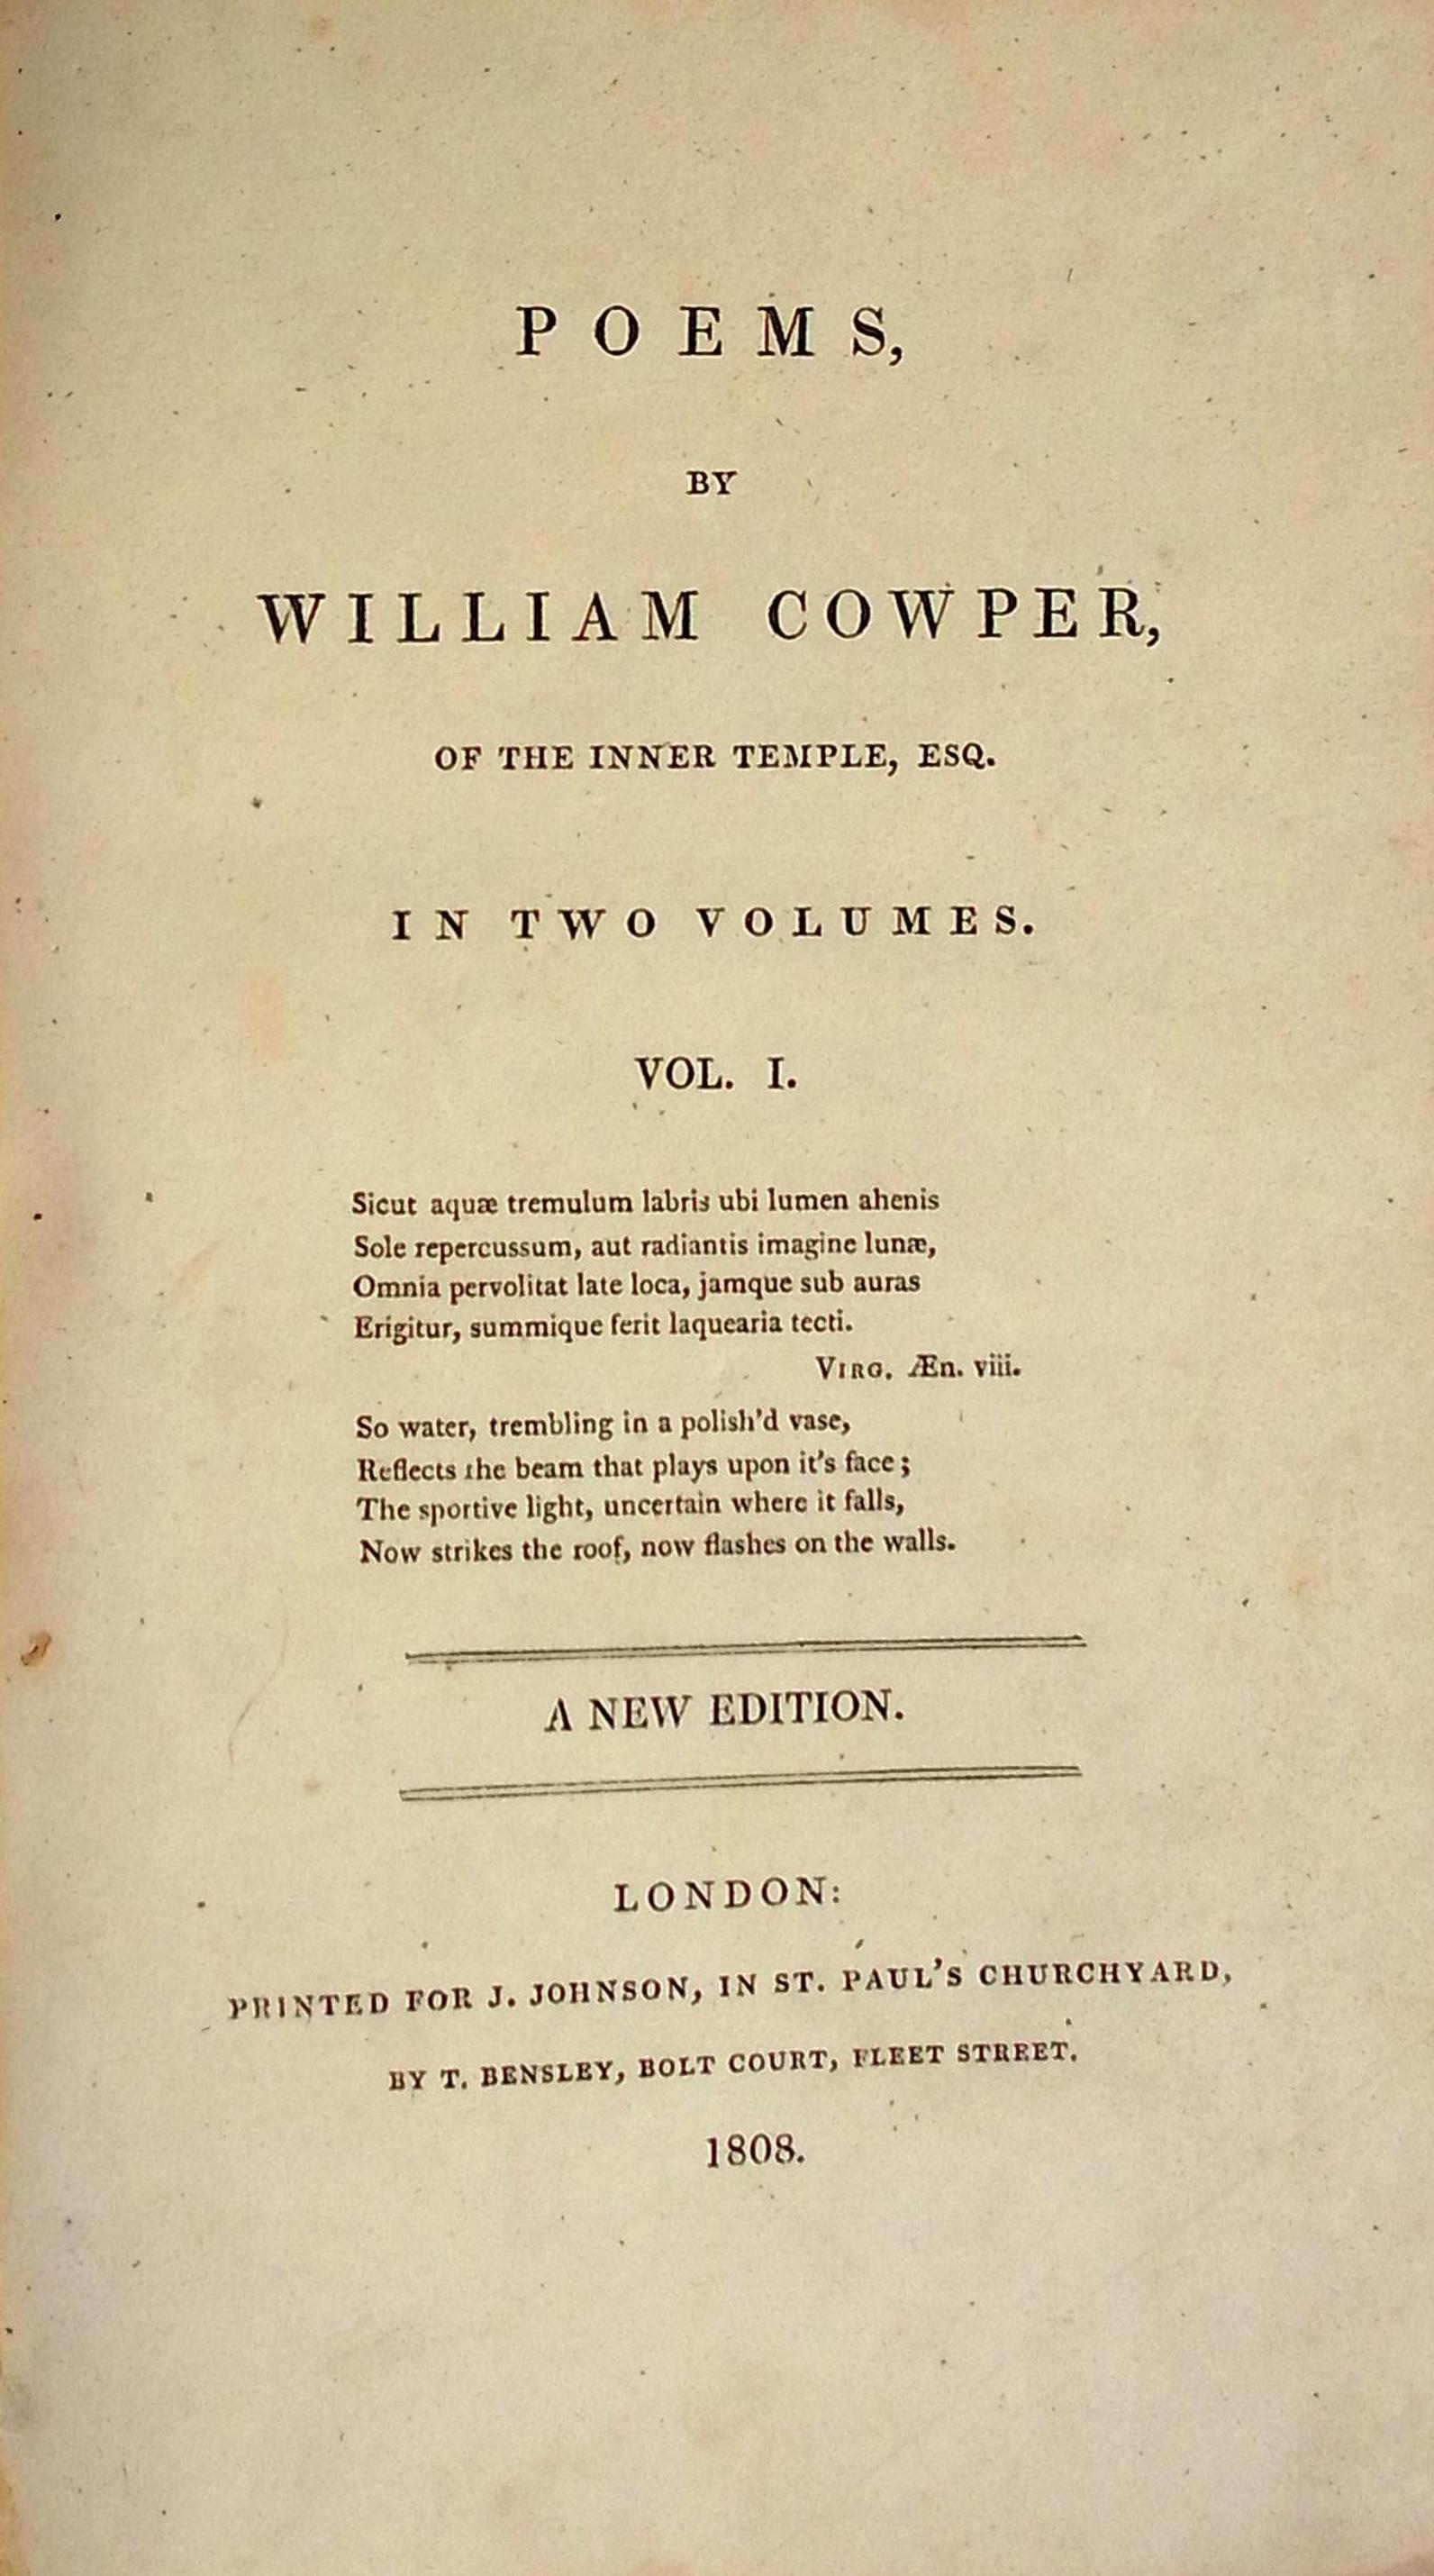 Poems by William Cowper of the Inner Temple, Esq. 2 volume set.